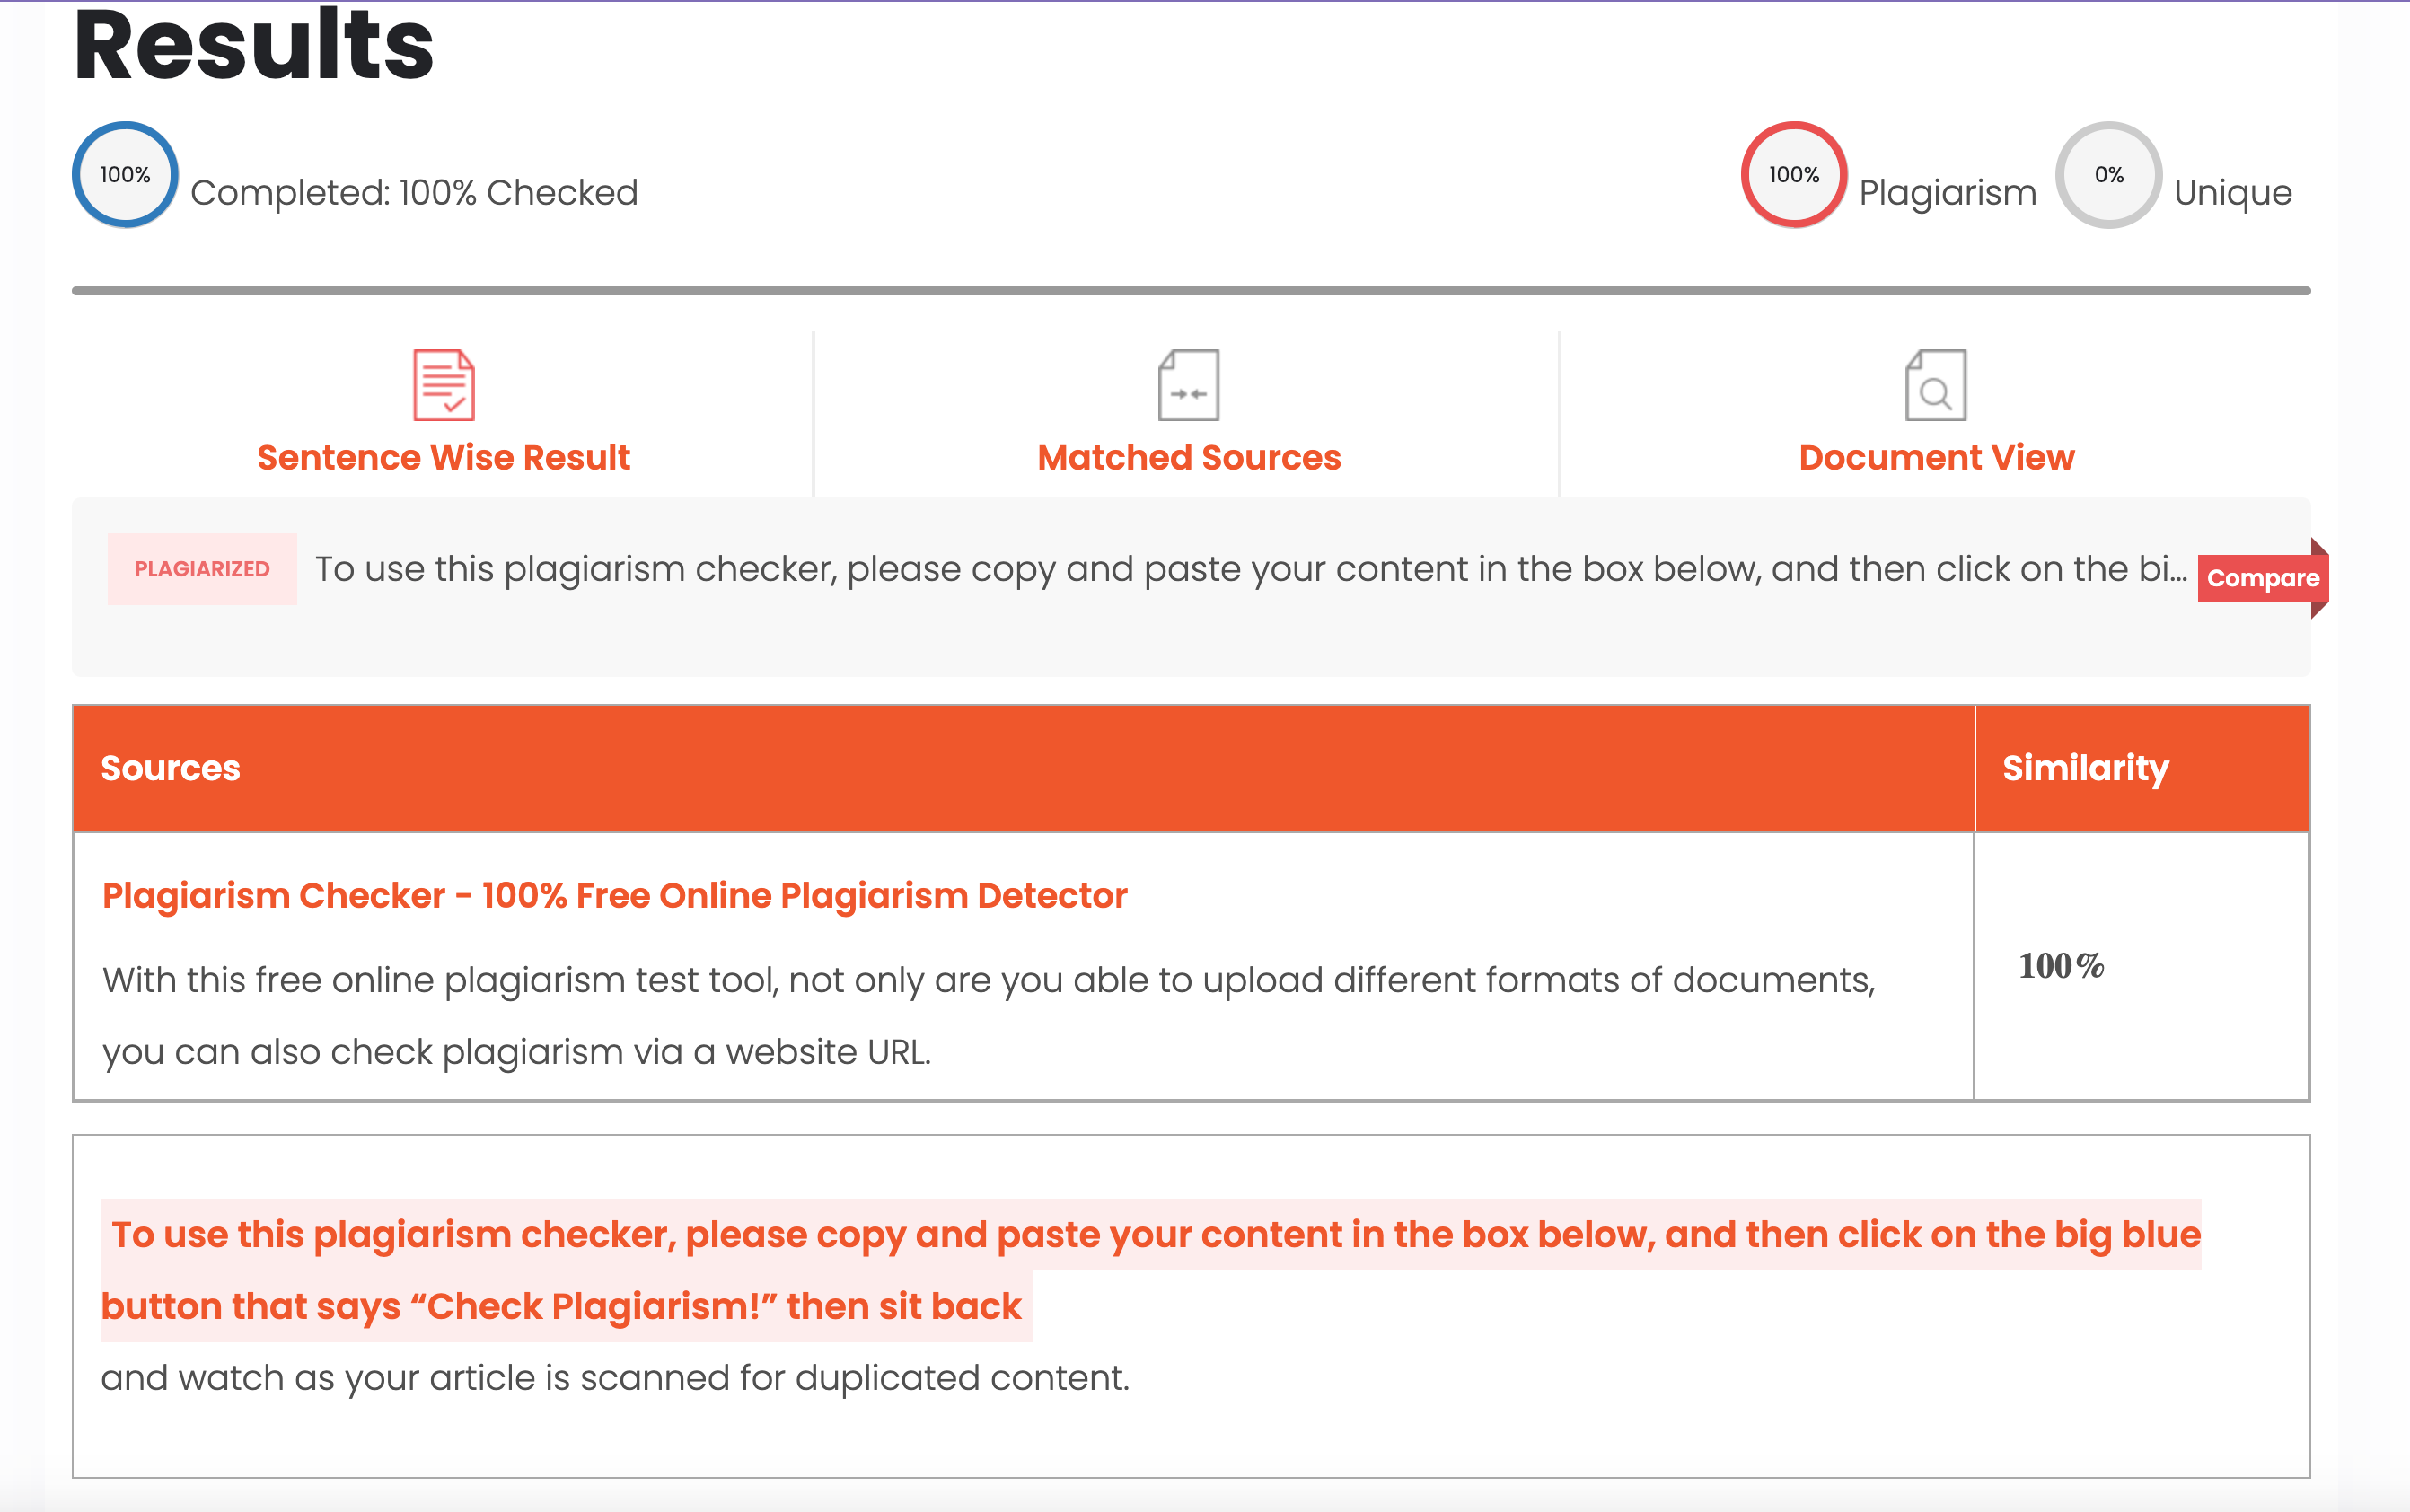 How Does the Plagiarism Checker Work? (Detailed Analysis) 1